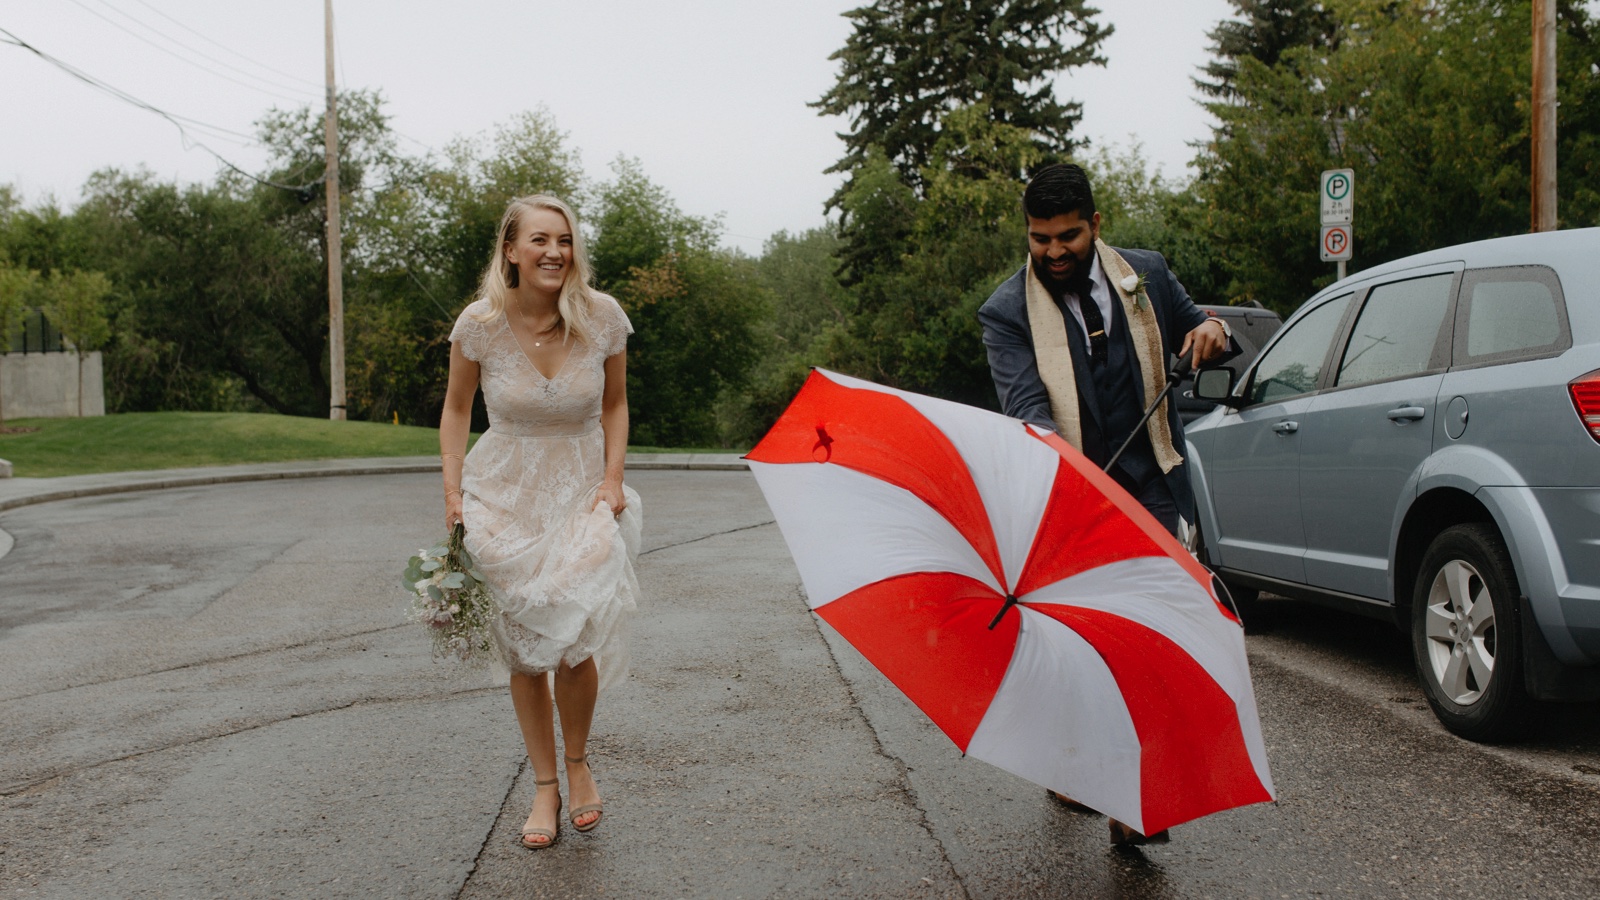 Bride and groom laughing as their umbrella turns inside out on a rainy day